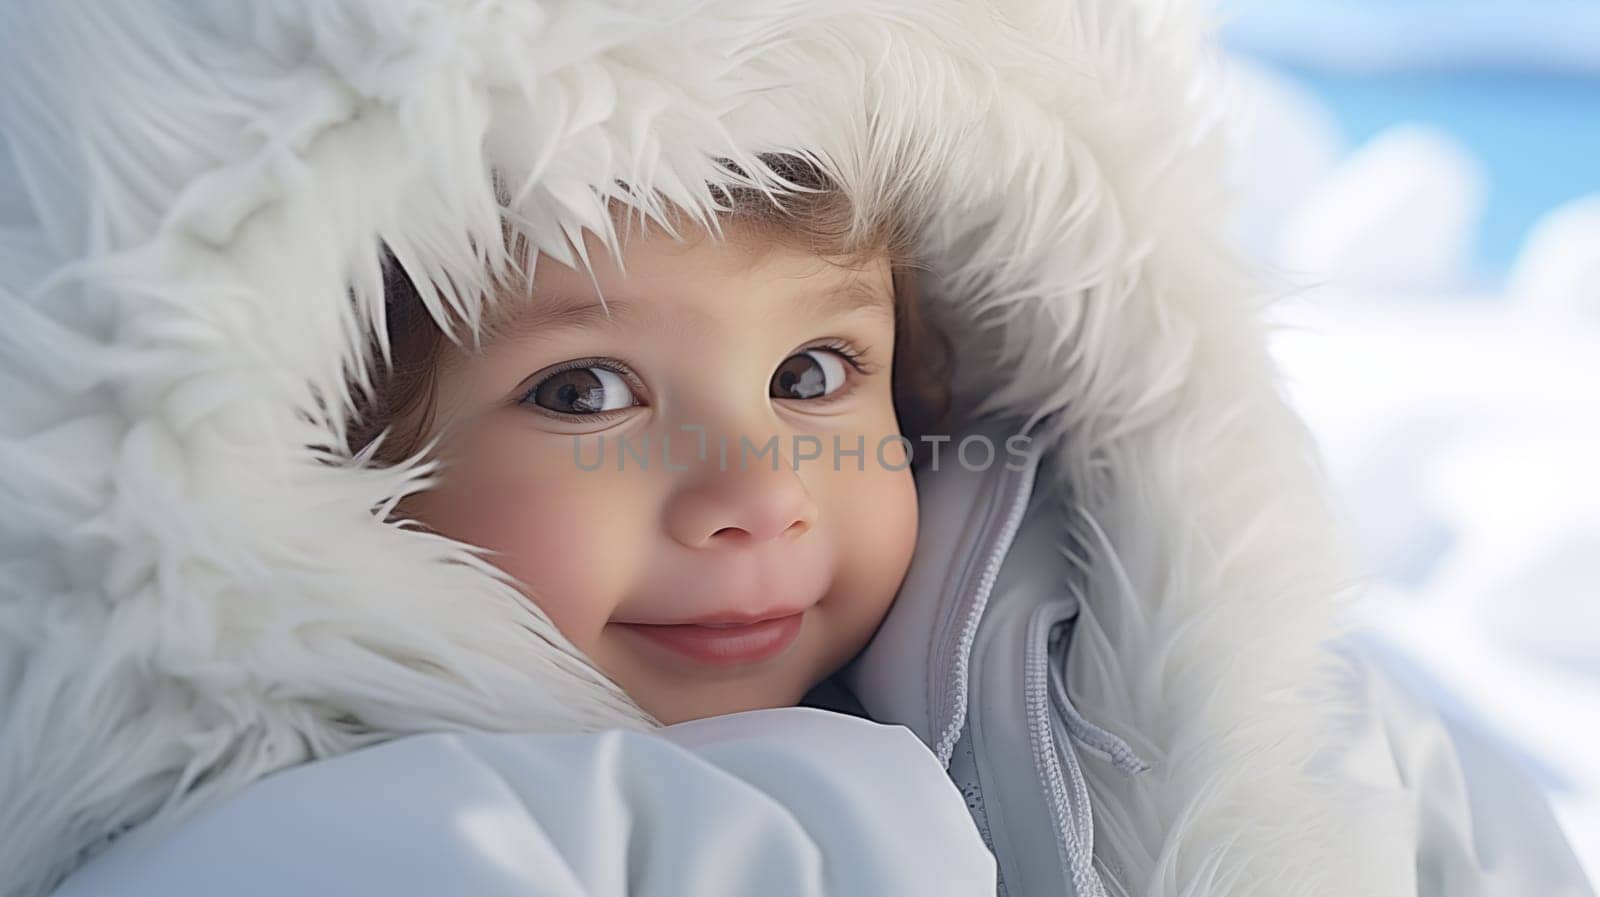 Close up of cute toddler with a windy winter jacket with hood, in winter, outdoors.